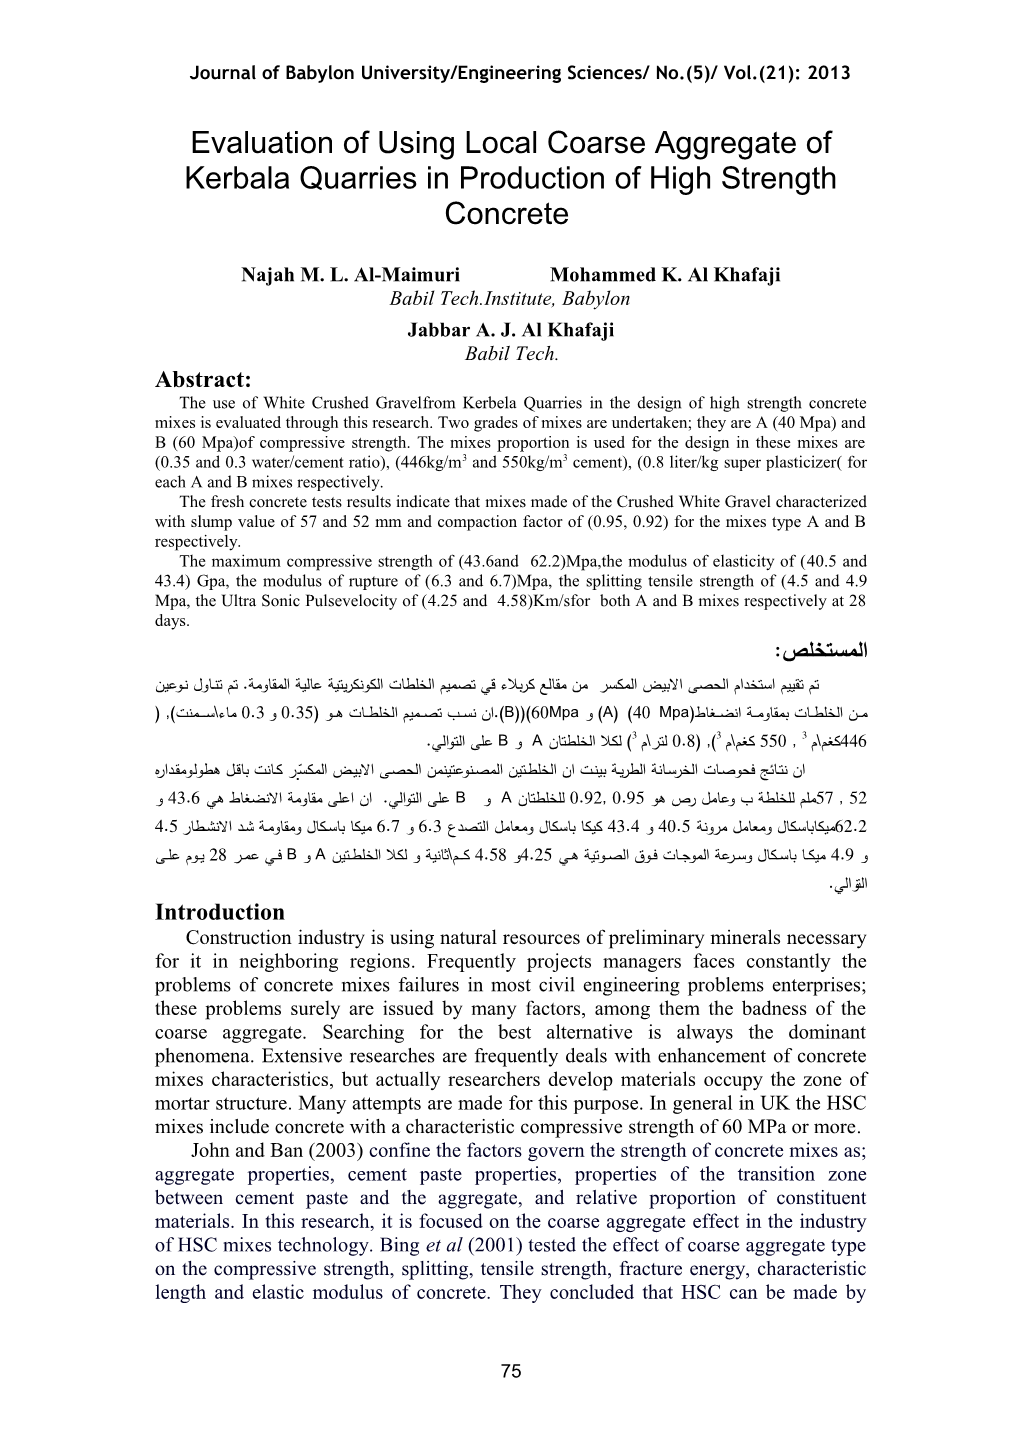 Evaluation of Using Local Coarse Aggregate of Kerbala Quarries in Production of High Strength